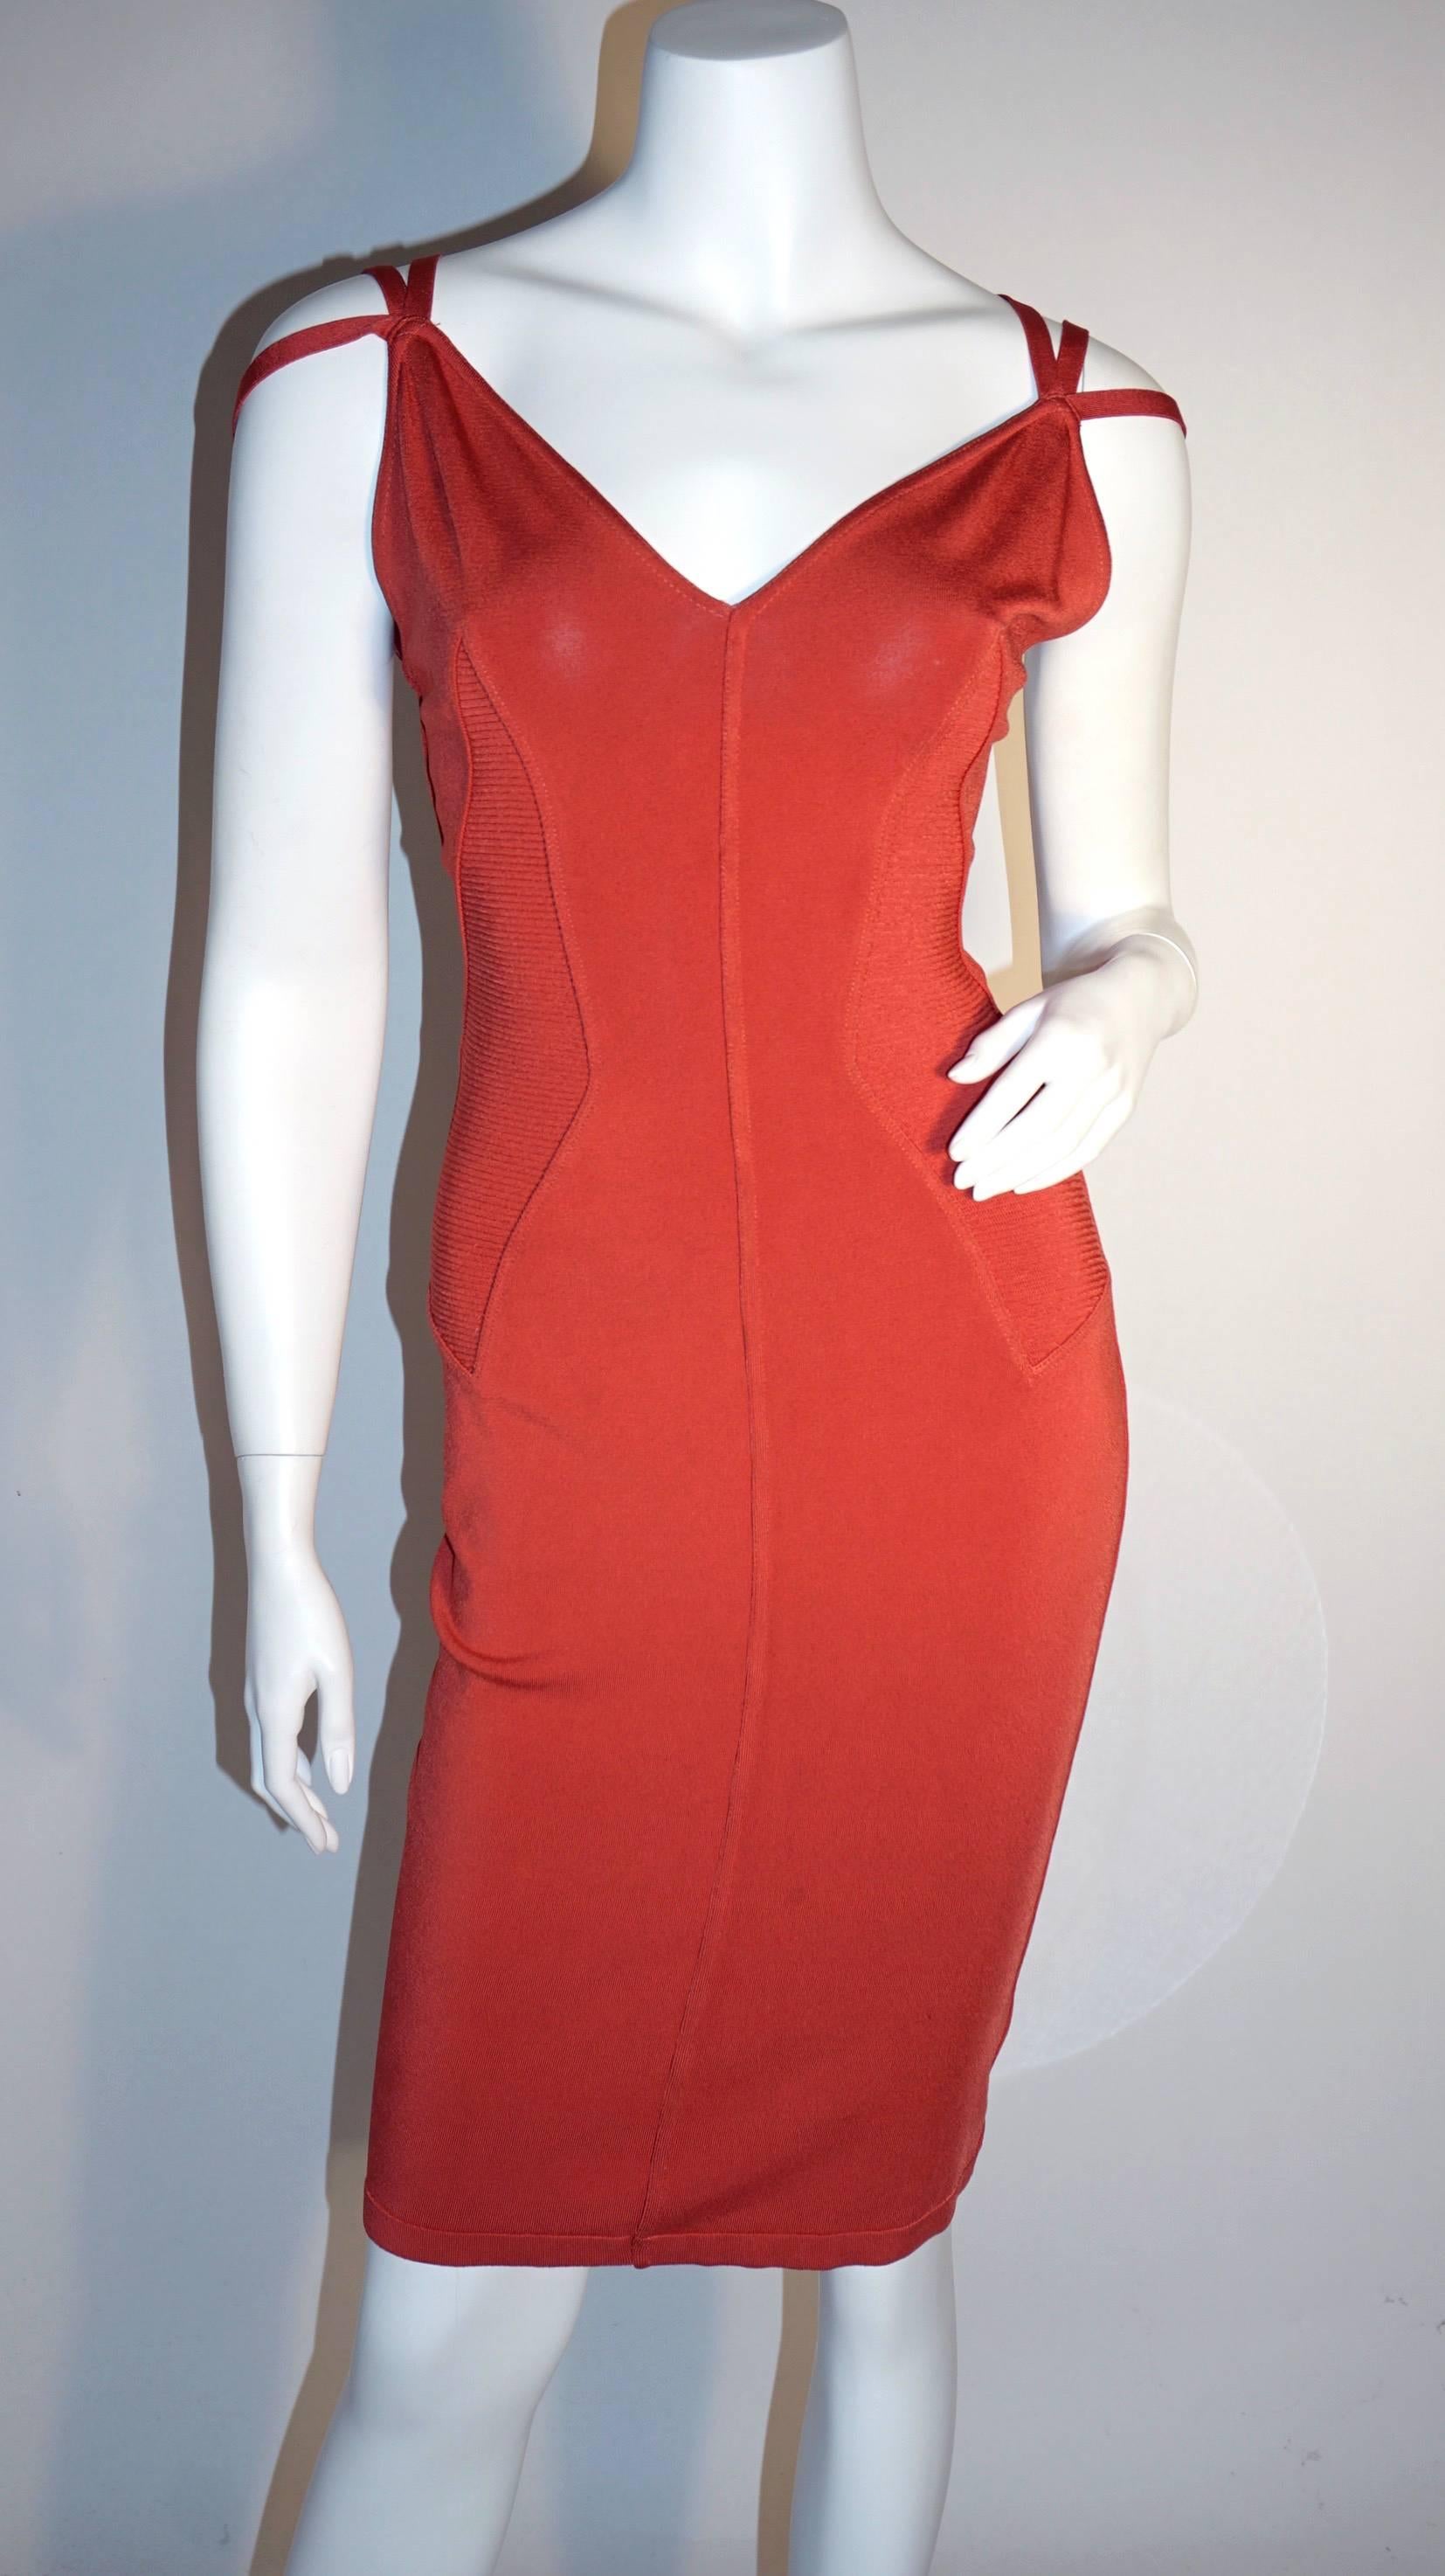 Circa 90s Alaia. This  bodycon dress features a gorgeous coral color, ribbed paneled sides, stretch material, and three straps on both shoulders. 

Very good condition. 
Photo on model via vettavintage (.com) -- Color shown better on the VV site.